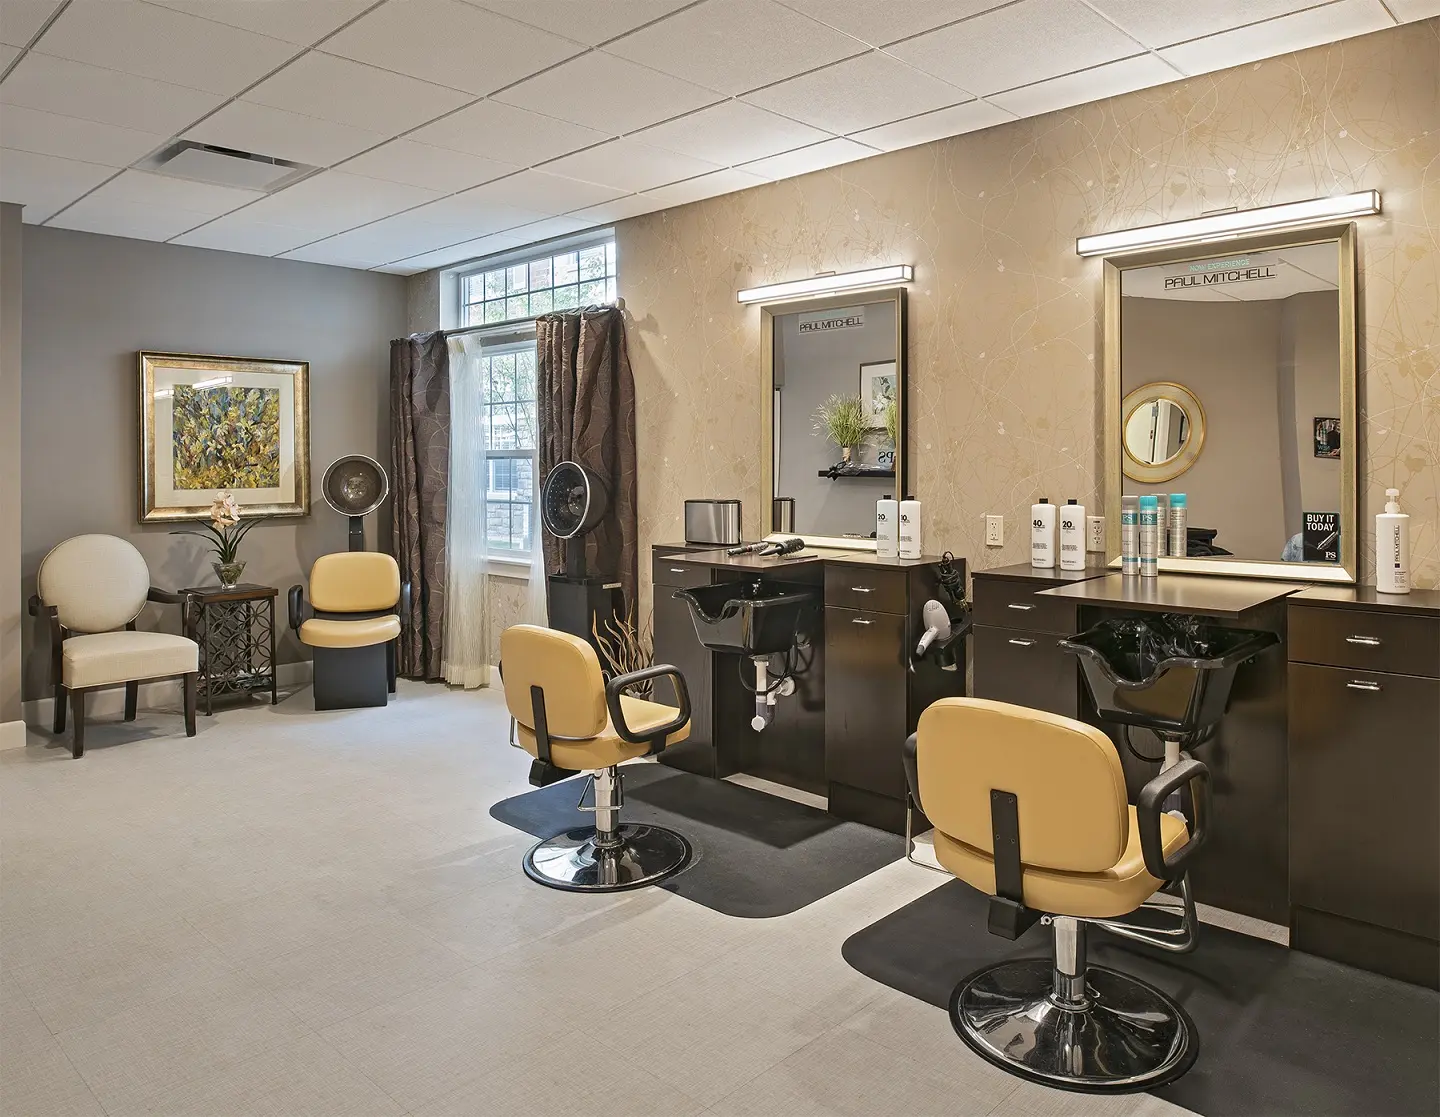 Salon at American House Macedonia, an assisted living community in Macedonia, Ohio.